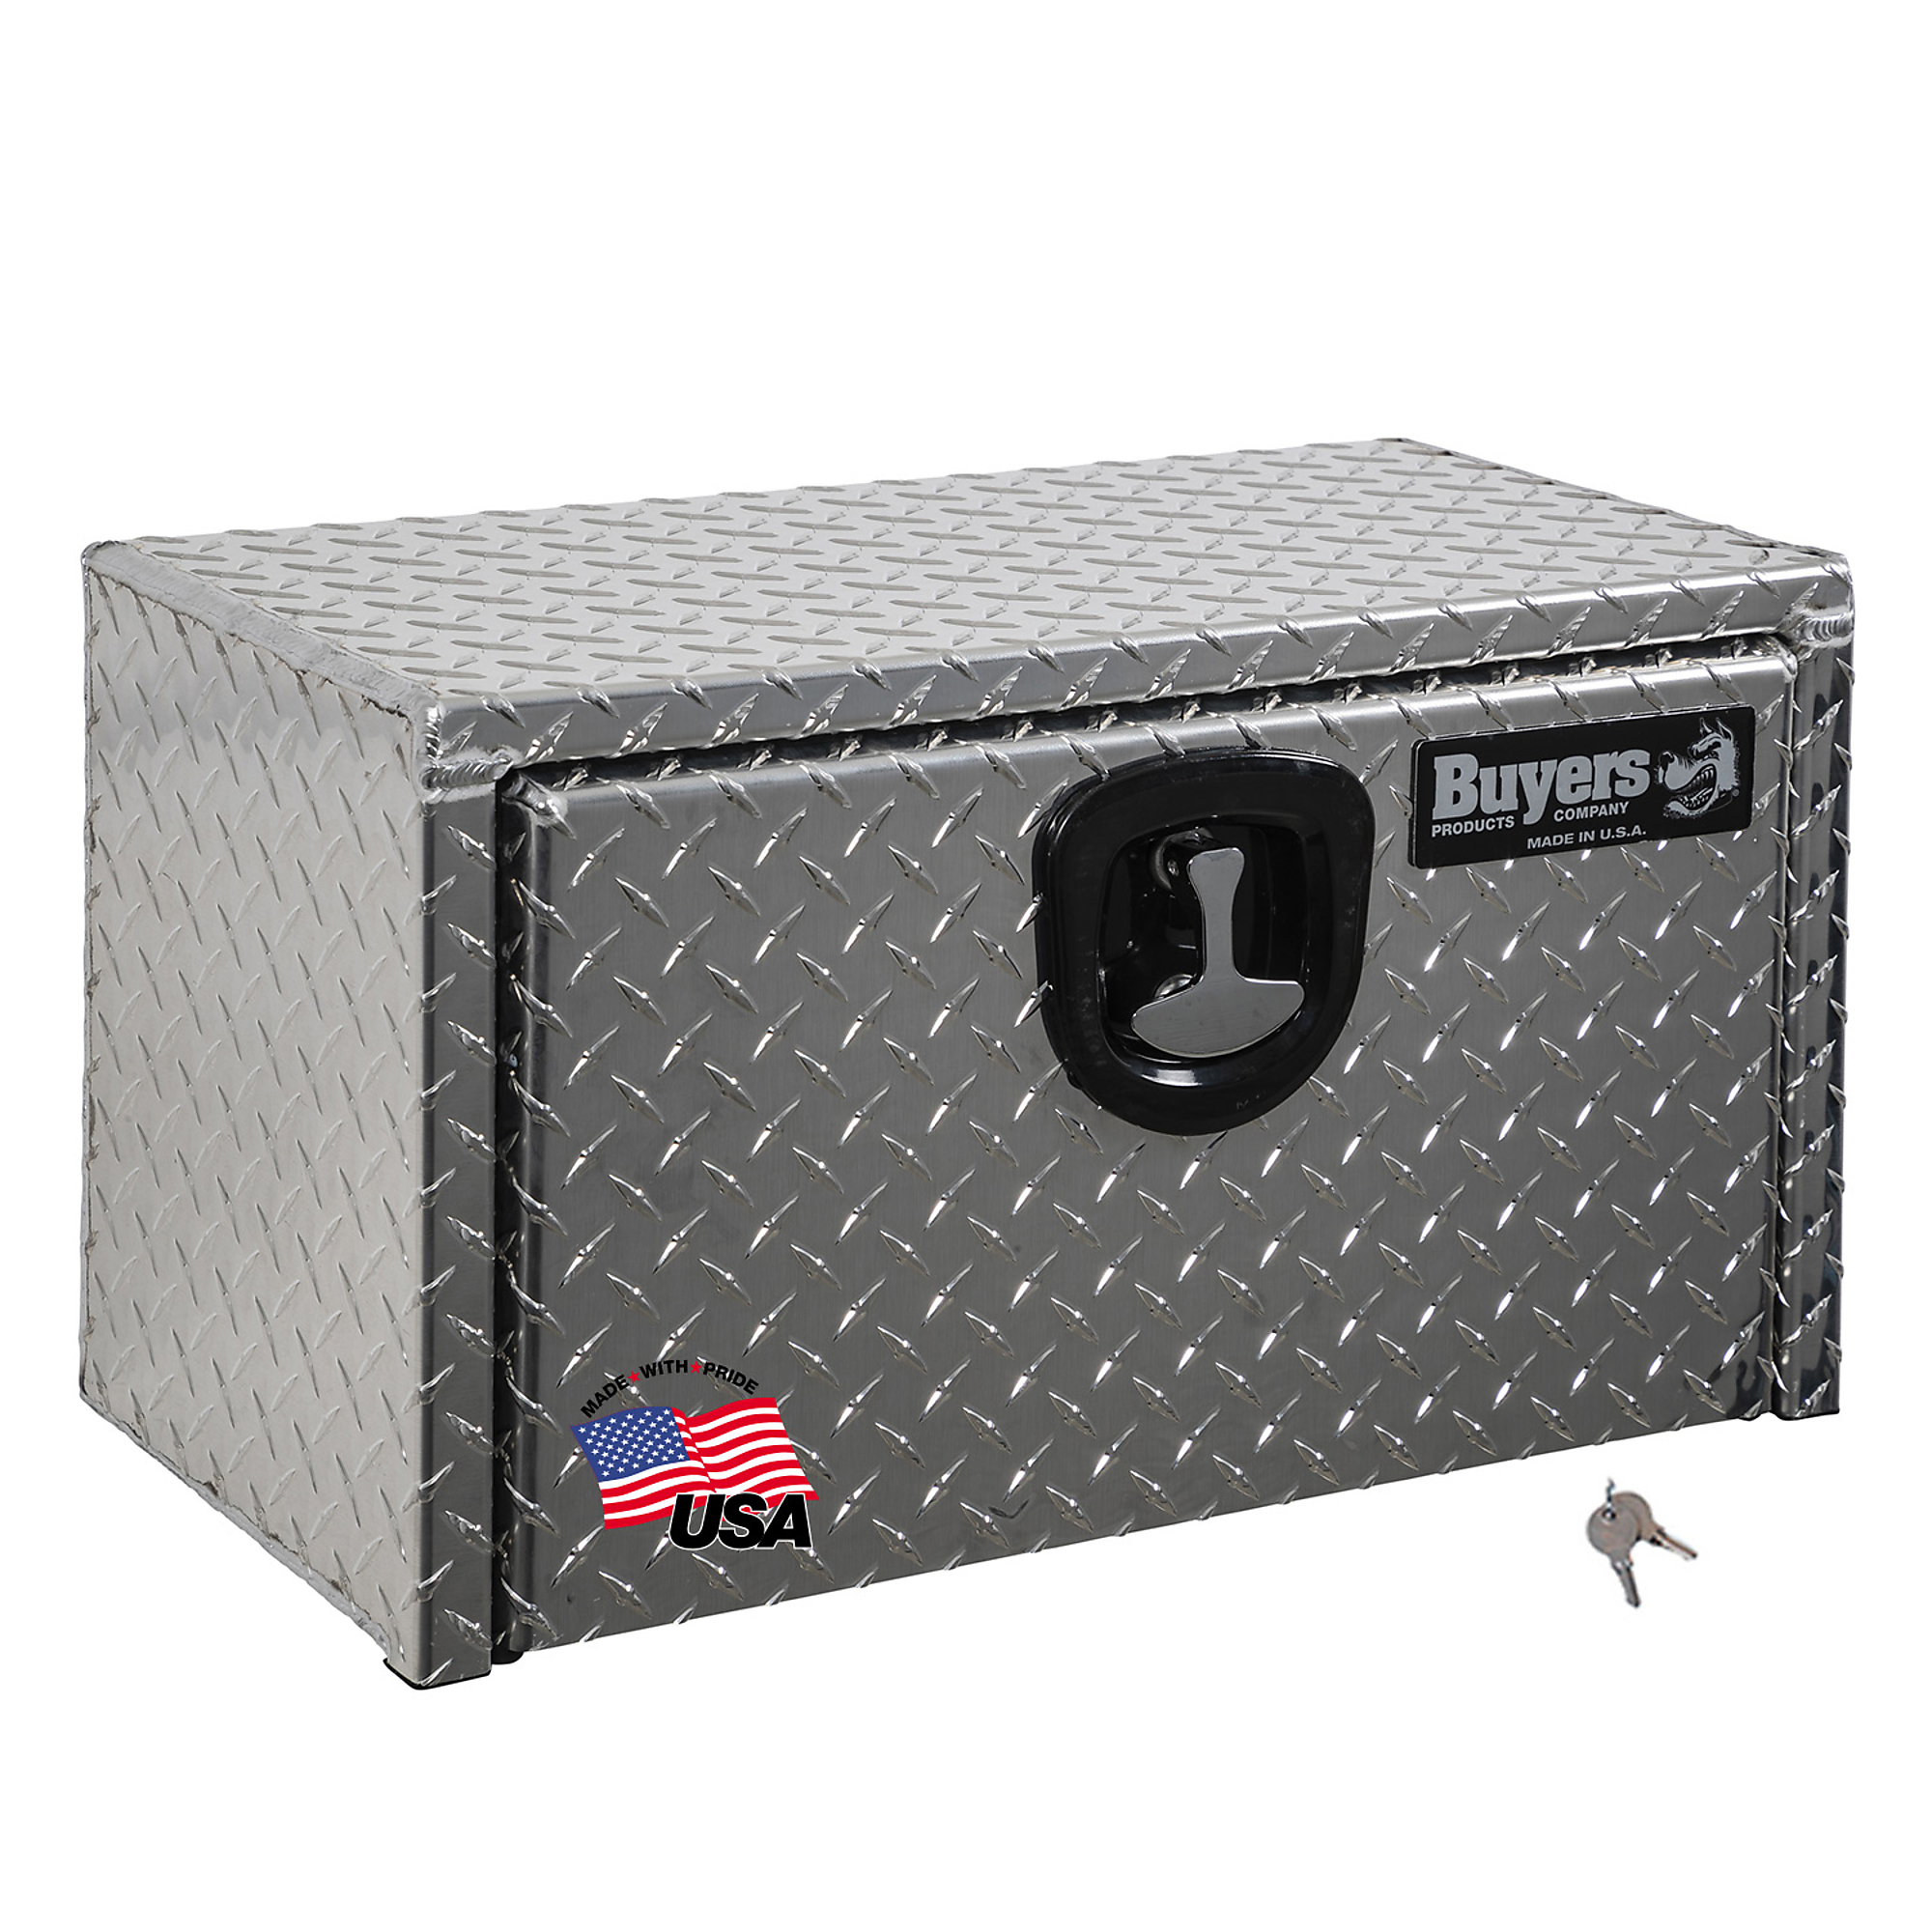 Buyers Products, Underbody Truck Box, Width 18 in, Material Aluminum, Color Finish Diamond Plate Silver, Model 1705149